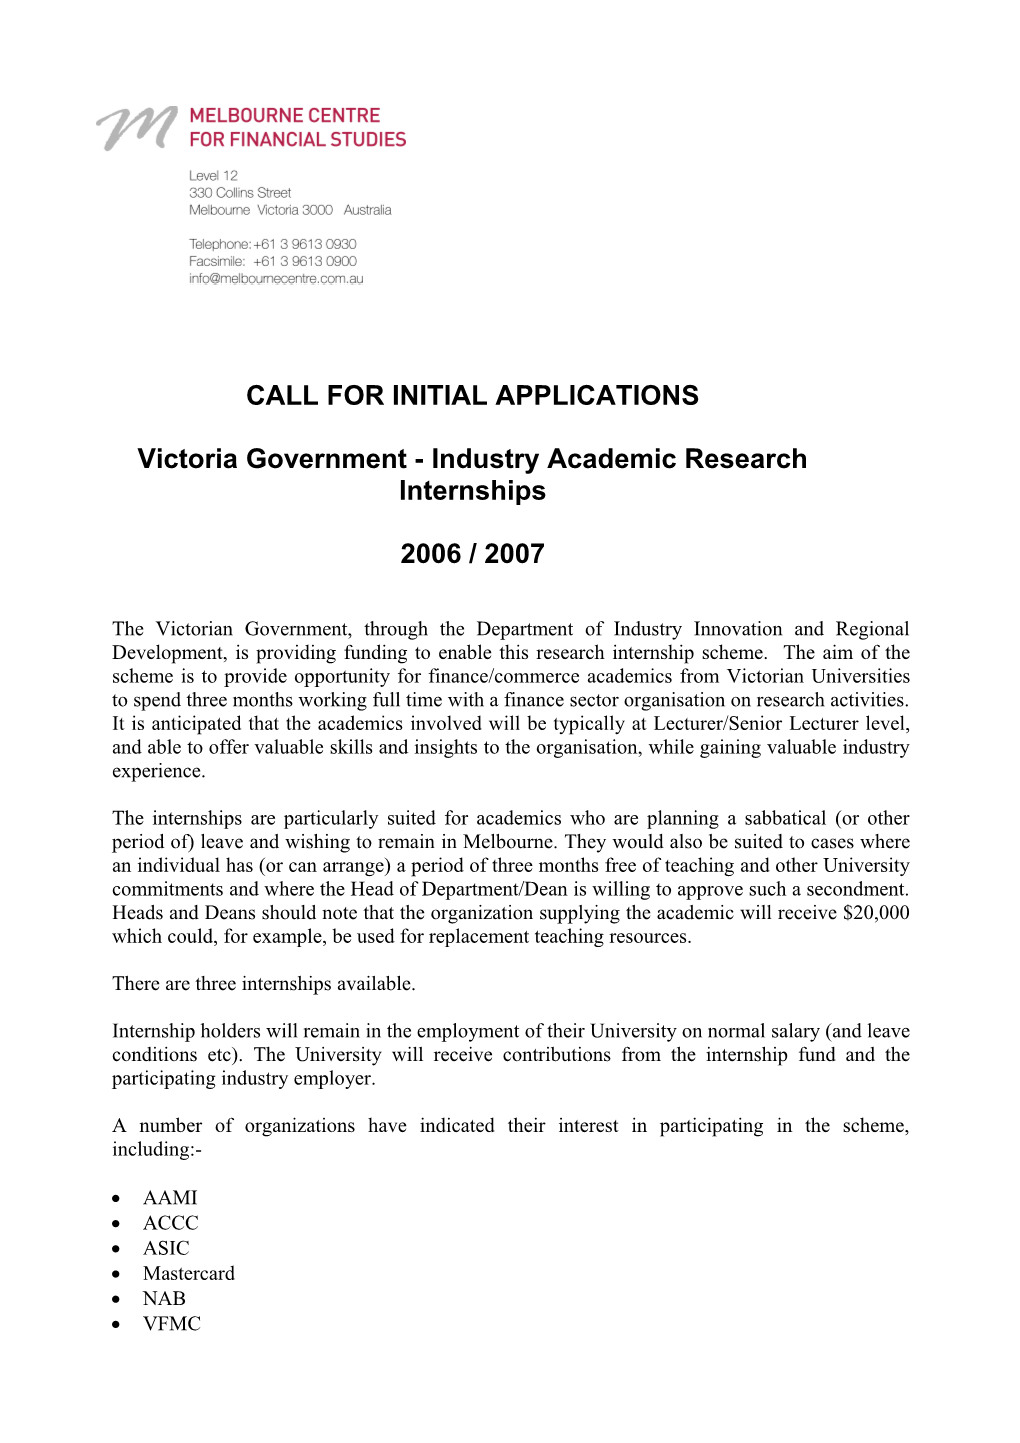 Call for Initial Applications